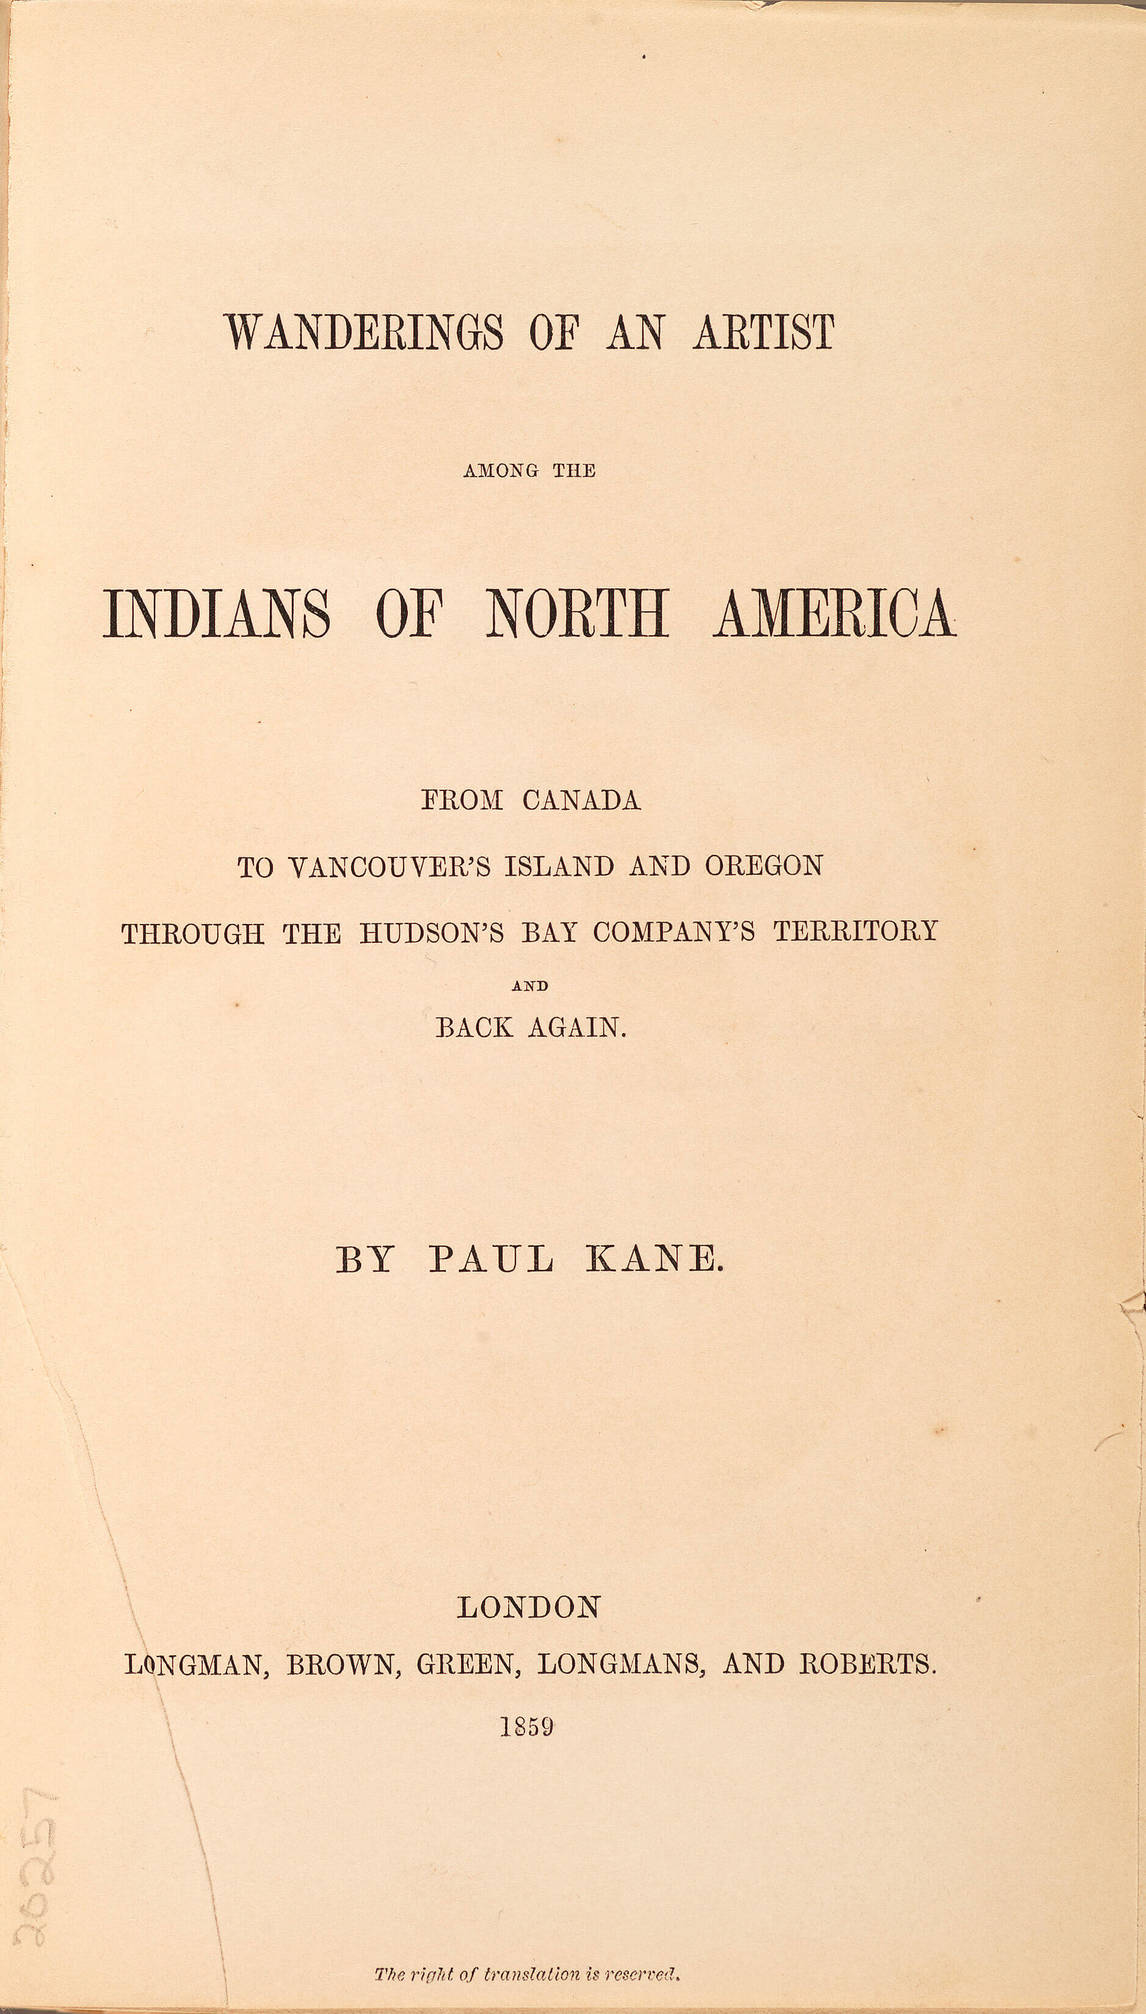 Art Canada Institute, Paul Kane, Title page of Paul Kane, Wanderings of an Artist among the Indians of North America, from Canada to Vancouver’s Island and Oregon through the Hudson’s Bay Company’s Territory and Back Again, 1859